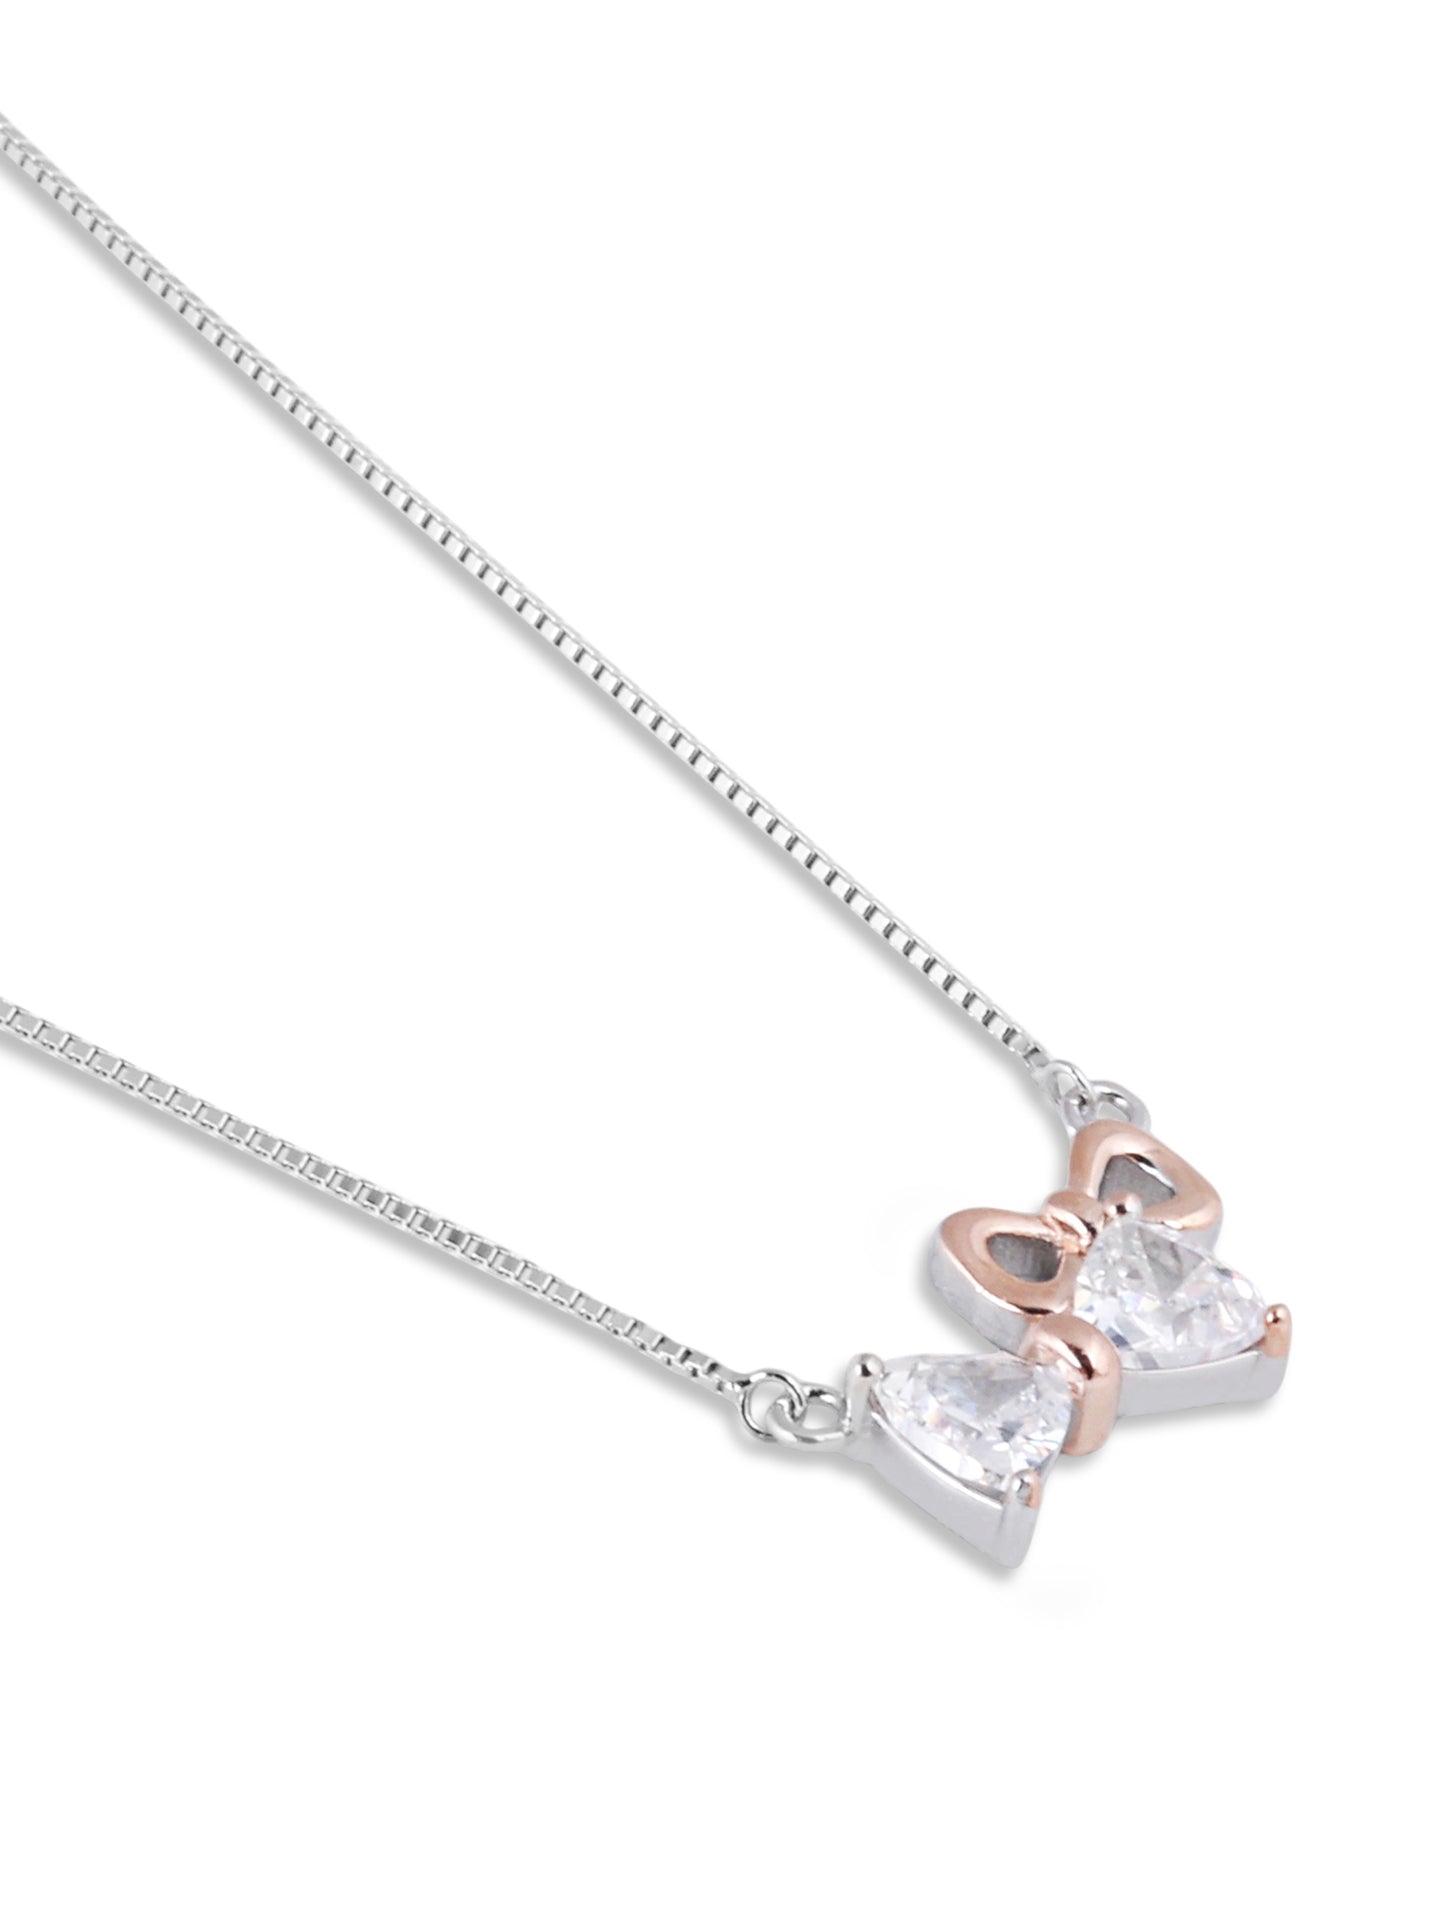 Mistletoe rose gold and white gold pendant with chain